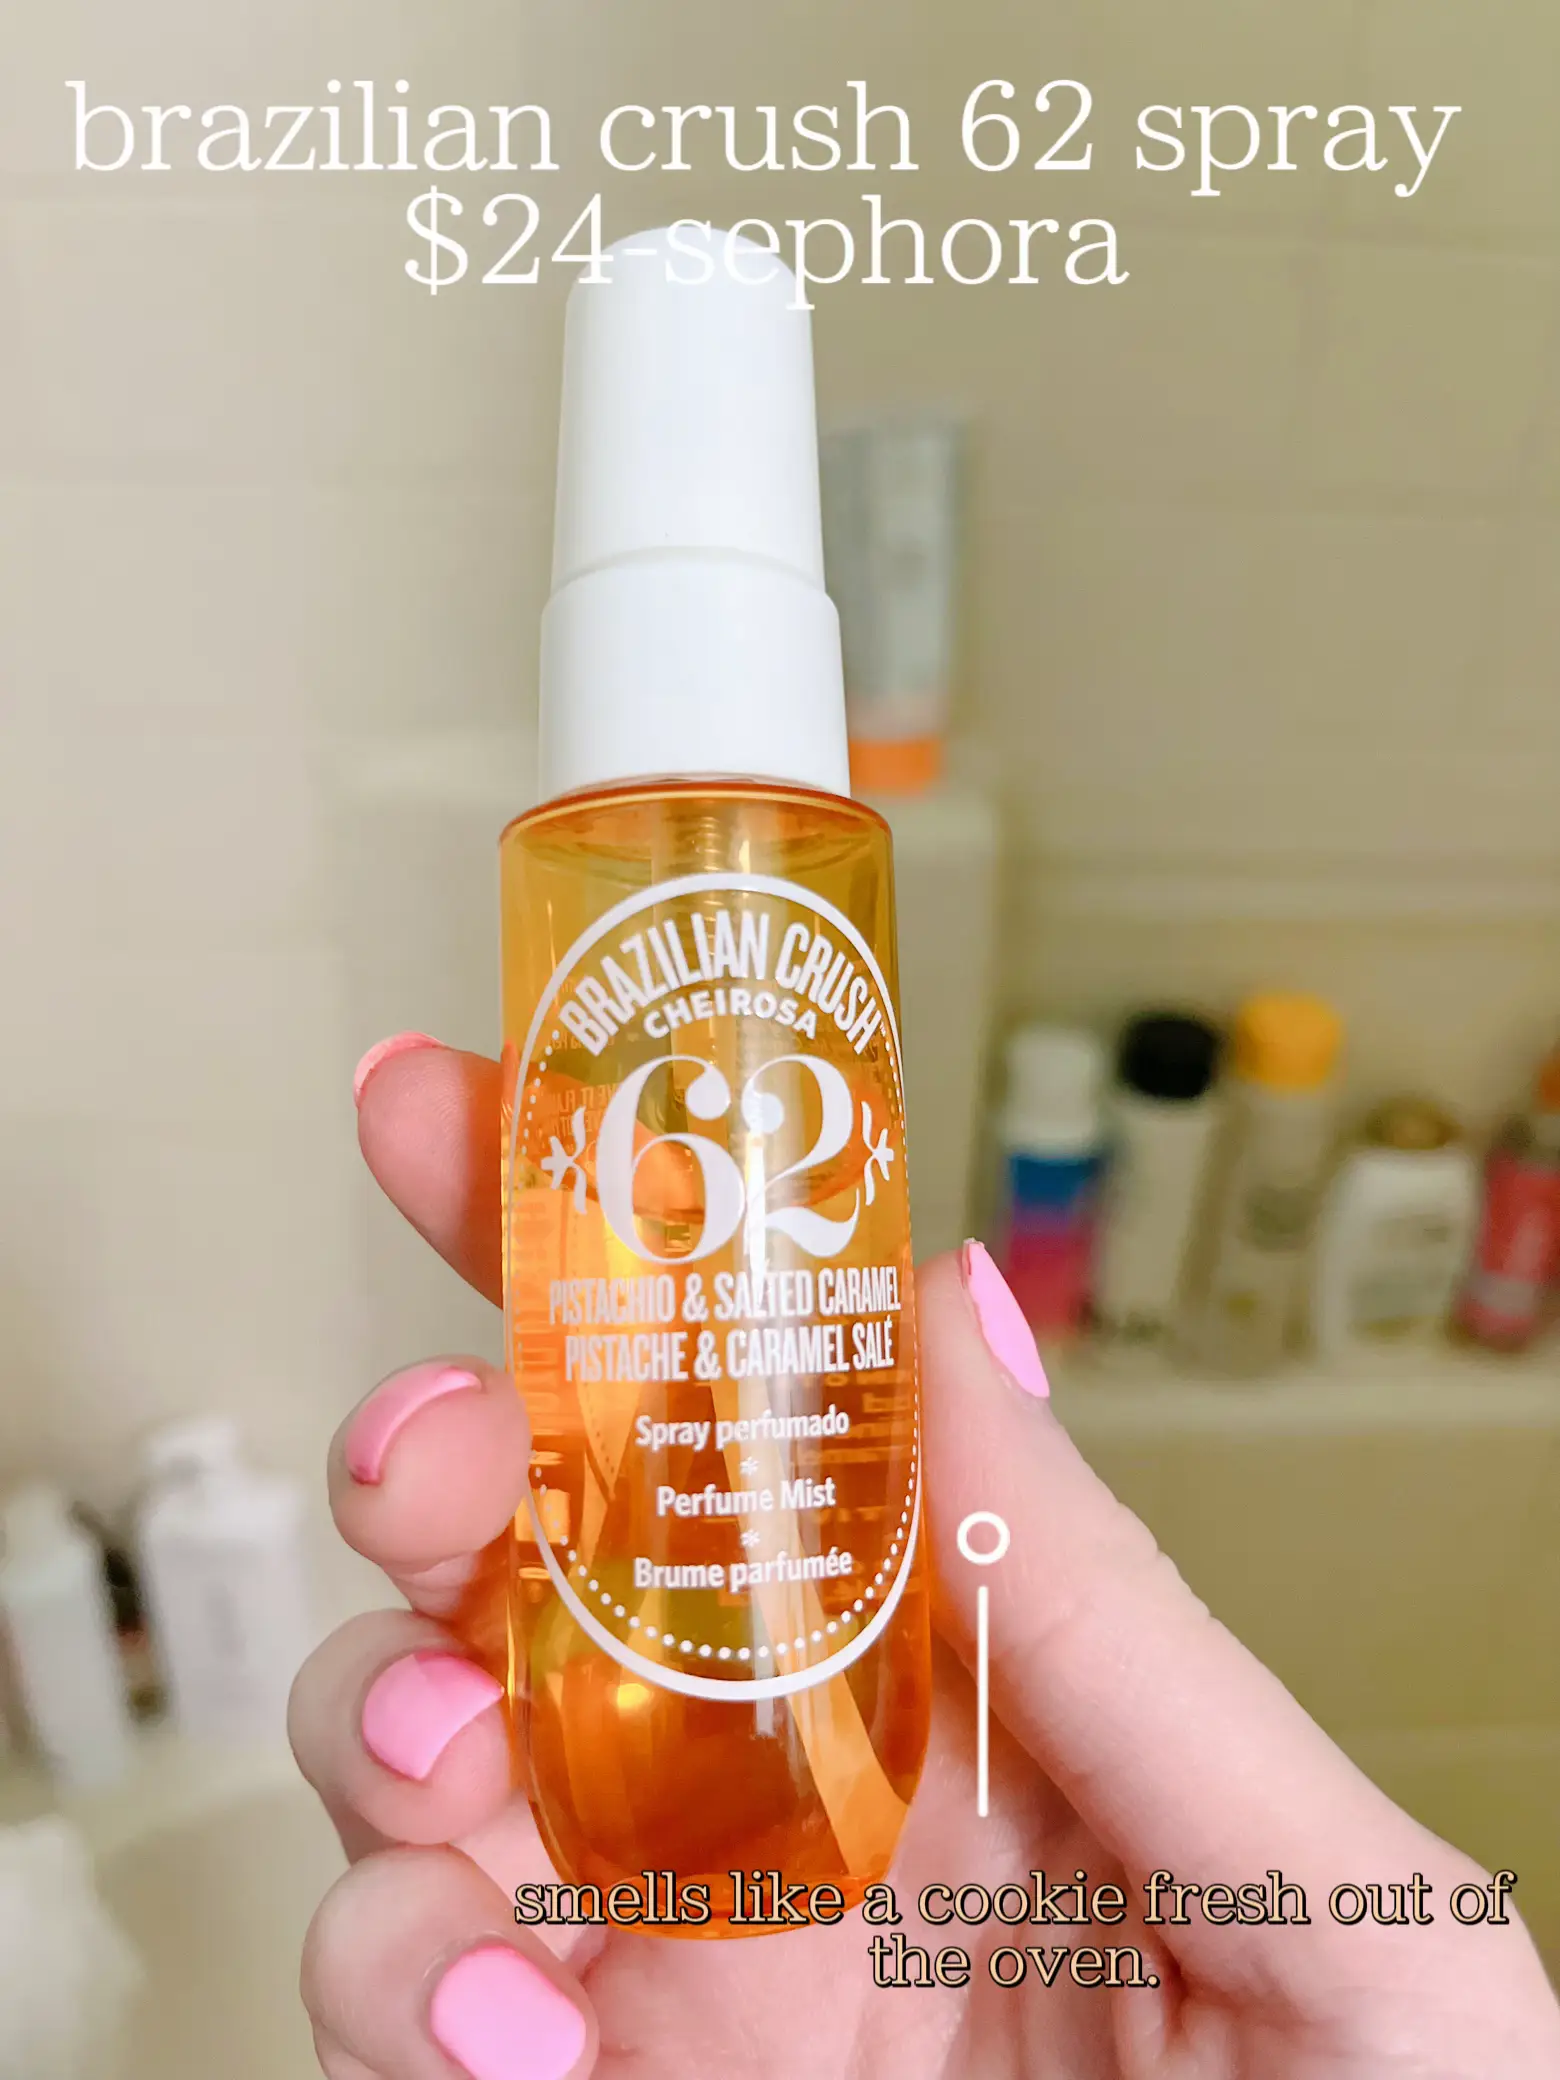 Clarins Firming Body Oil and Body Fit - Do they work? : r/Sephora